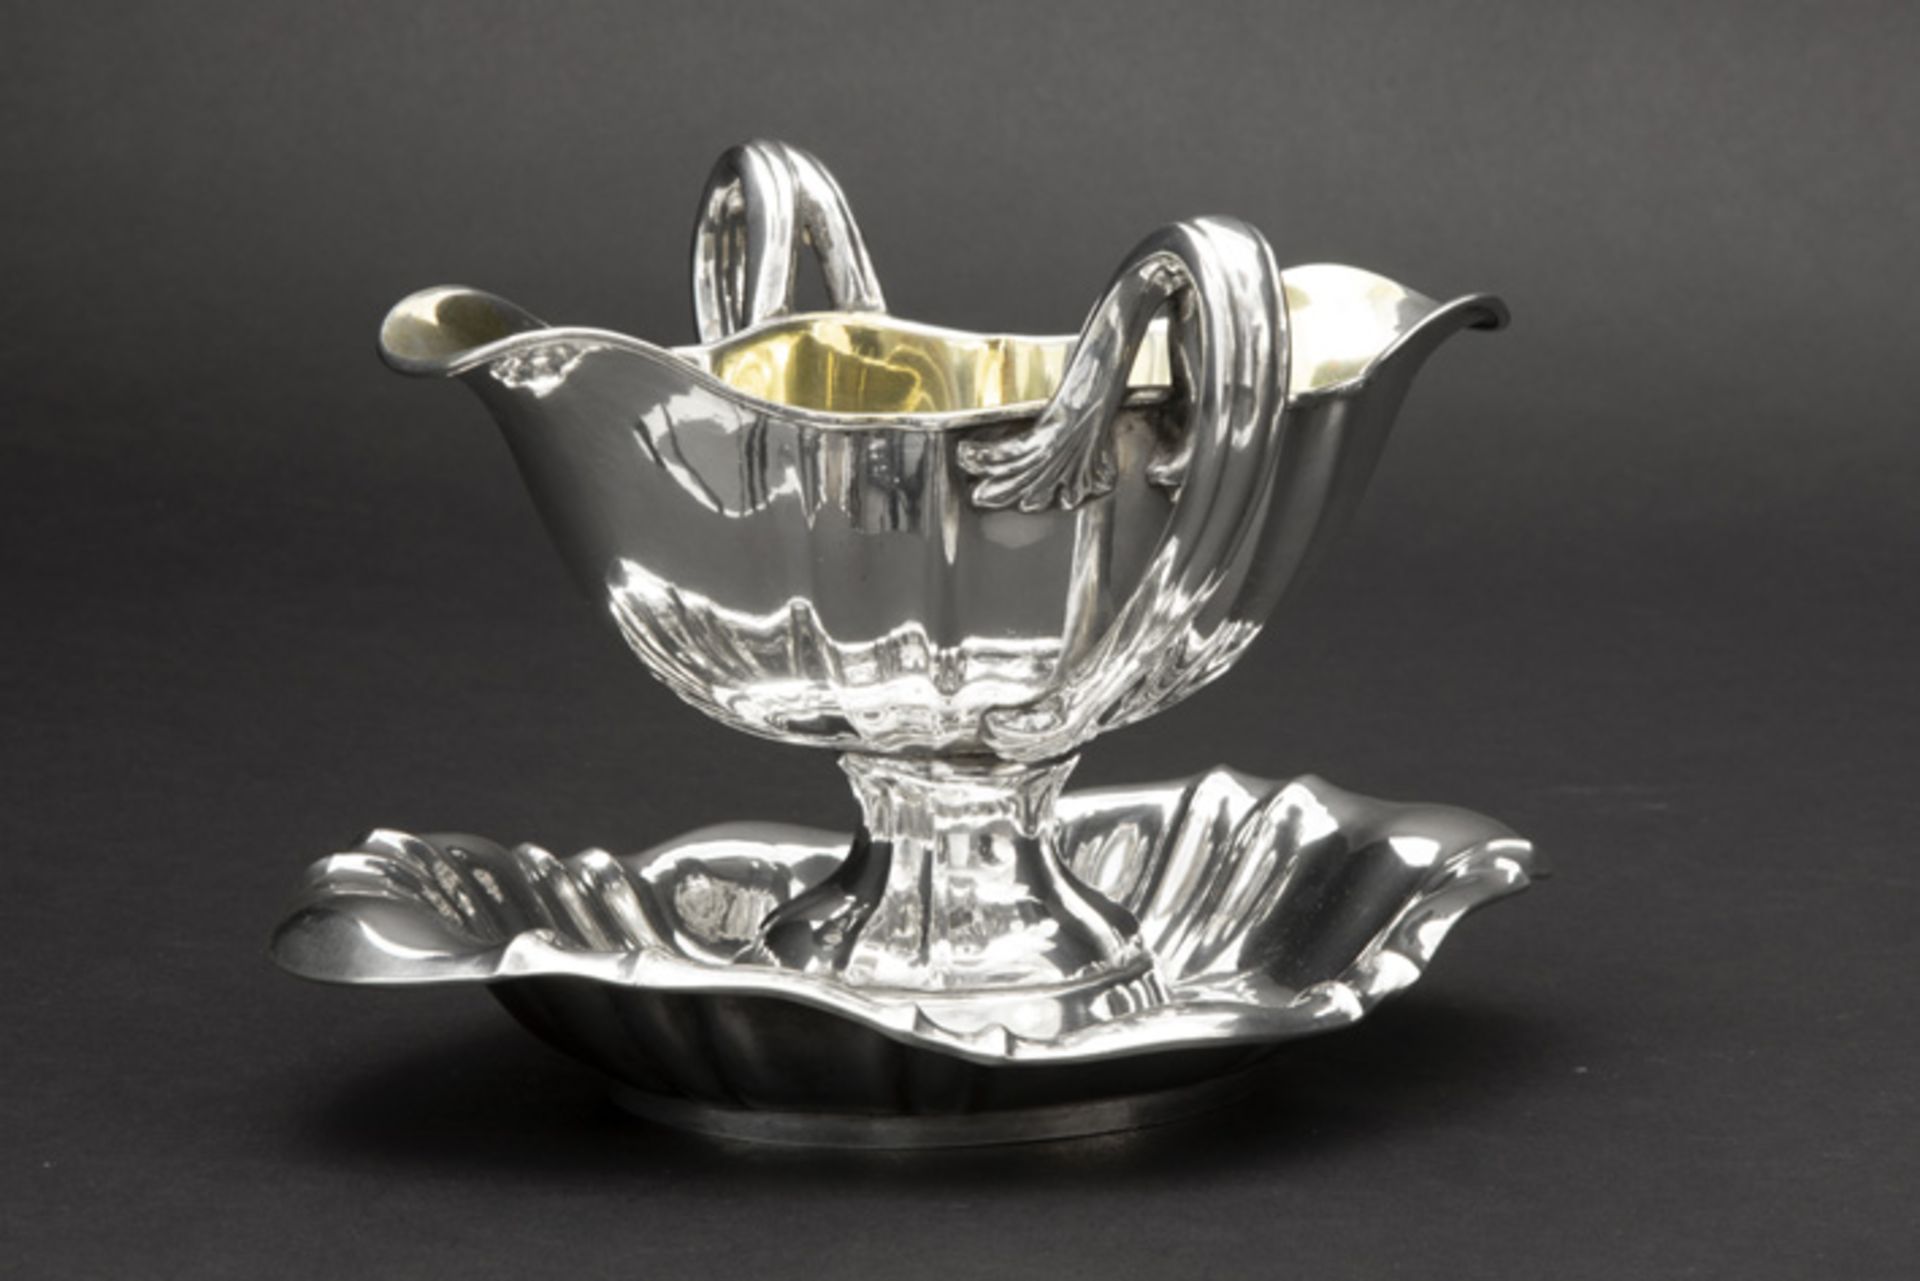 antique Belgian "Wolfers" signed Louis XV style sauce boat in marked silver WOLFERS (1852 - 1892) - Image 2 of 3